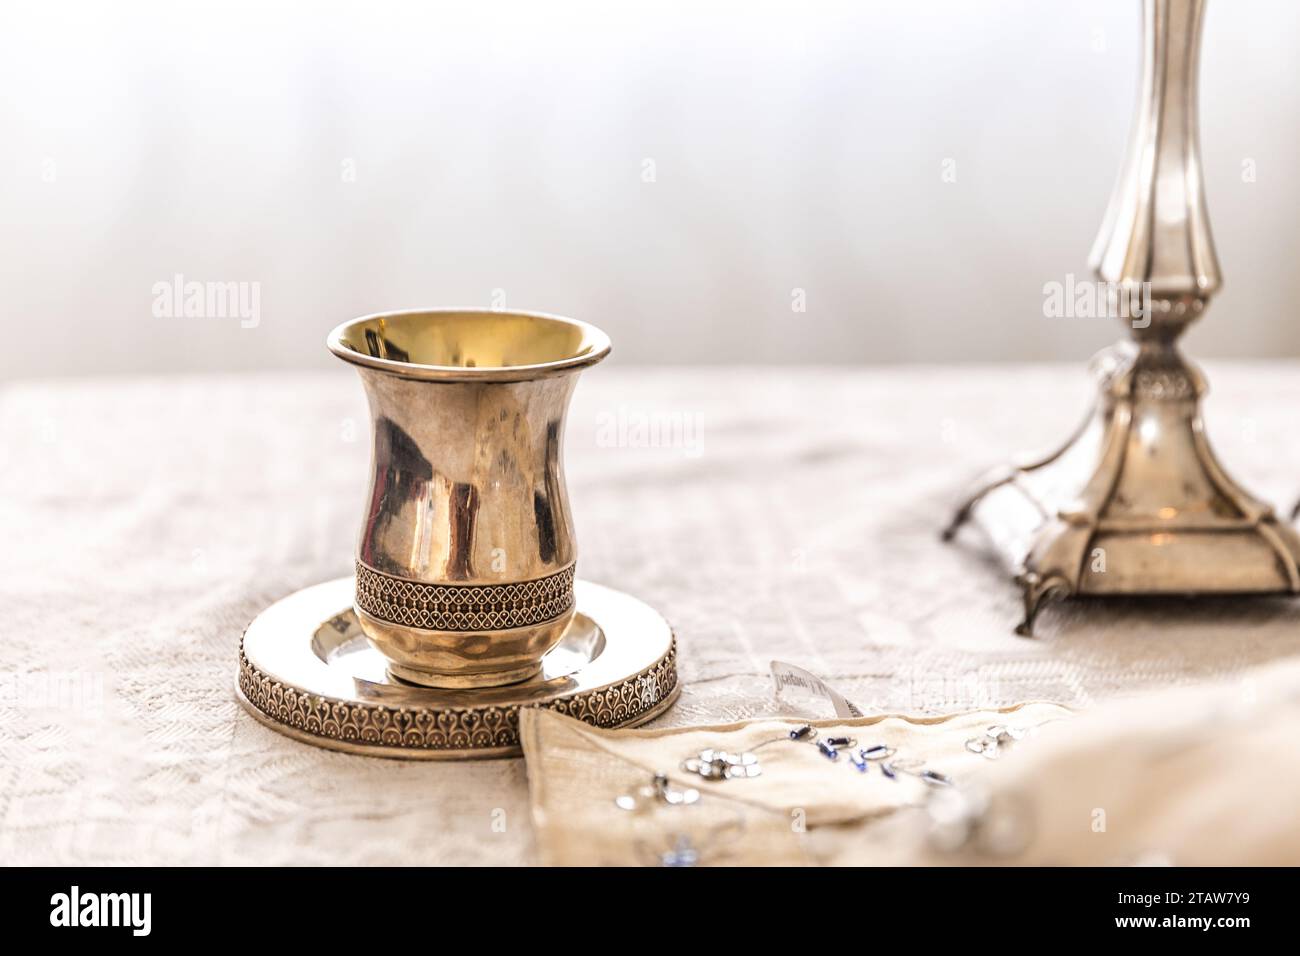 Traditional, decorative Jewish kiddush cup. Silver cup with saucer filled to the brim with purple wine isolated on a white background Stock Photo